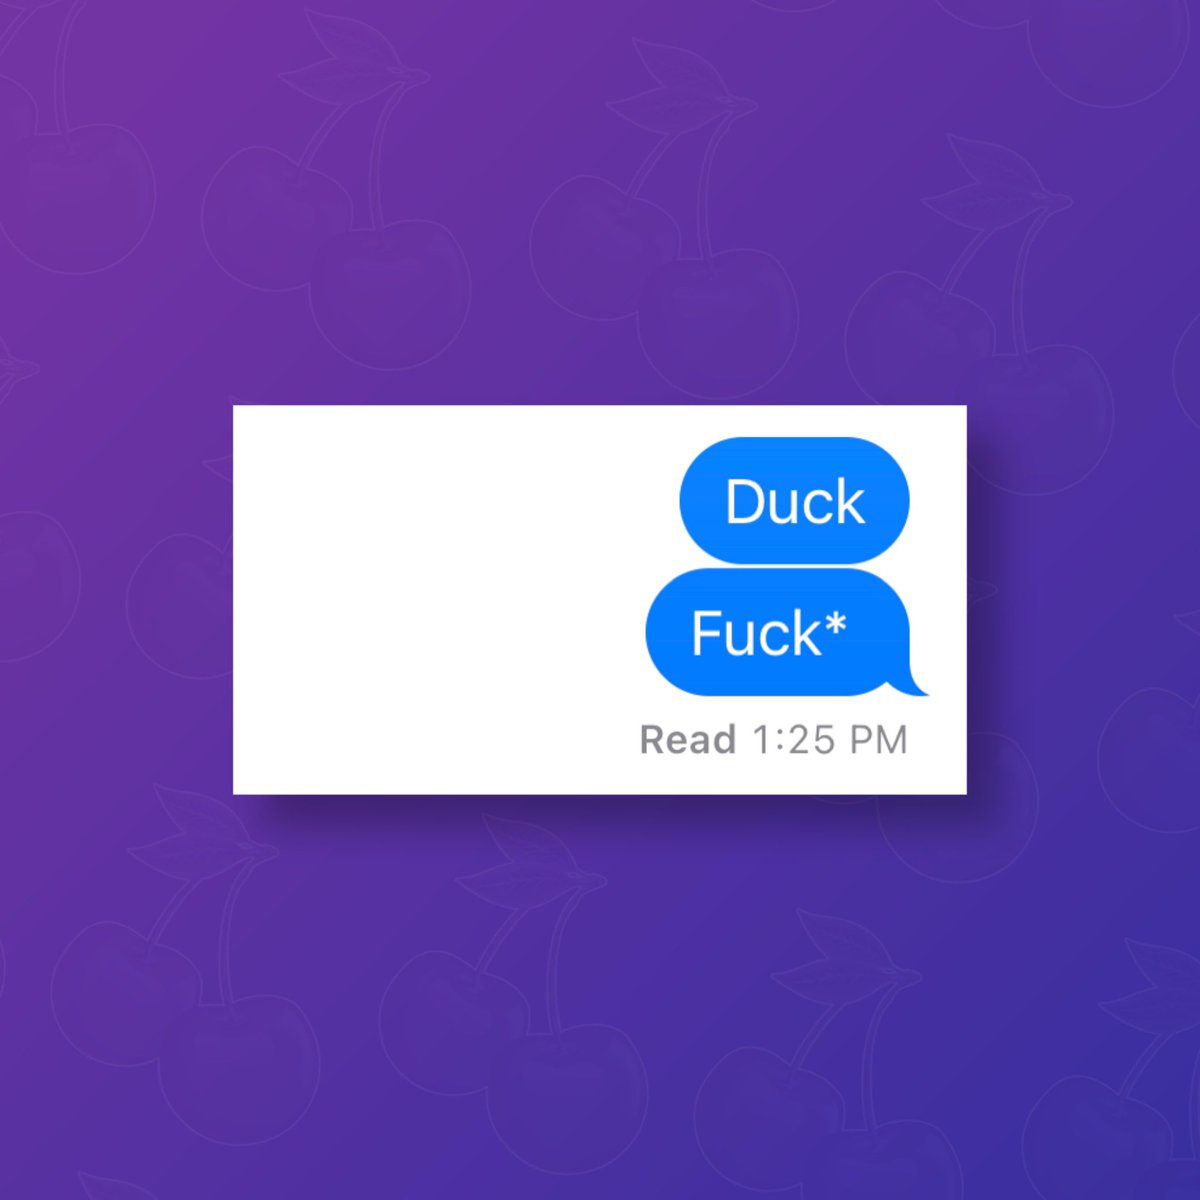 Apple’s new update has fixed autocorrect so that ‘f*cking’ no longer changes to ‘ducking’ while someone types, as well as other common errors.